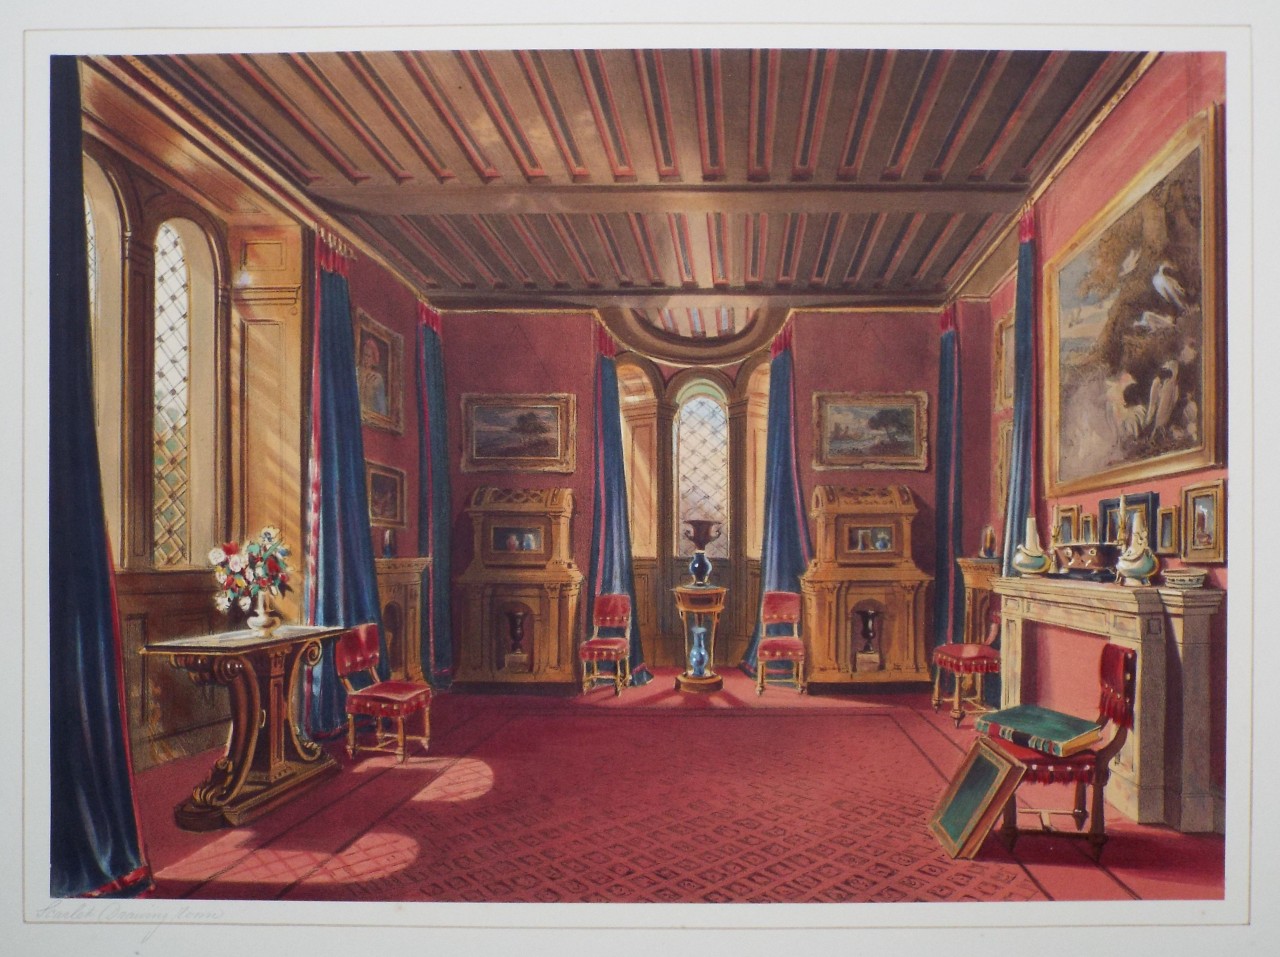 Chromo-lithograph - The Scarlet Drawing Room. - Richardson